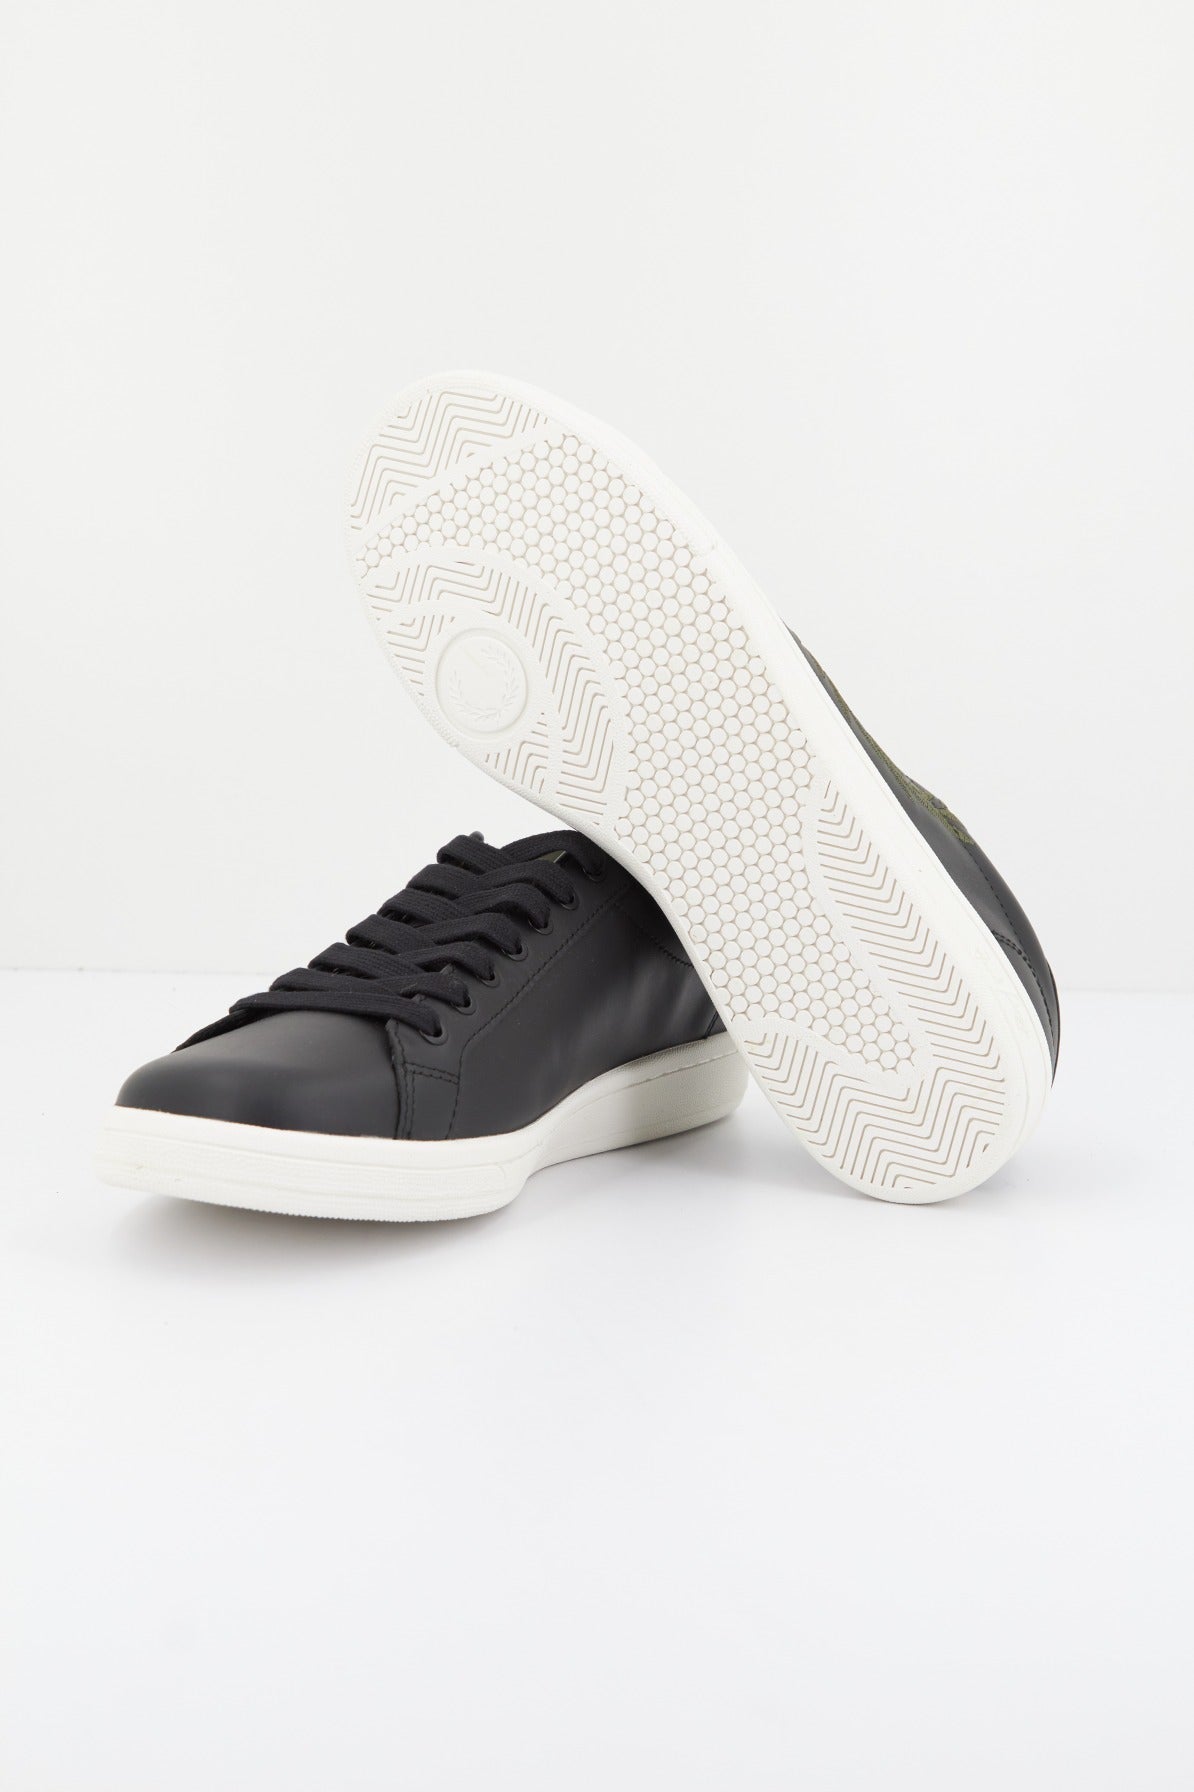 FRED PERRY LEATHER/BRANDED en color NEGRO  (4)